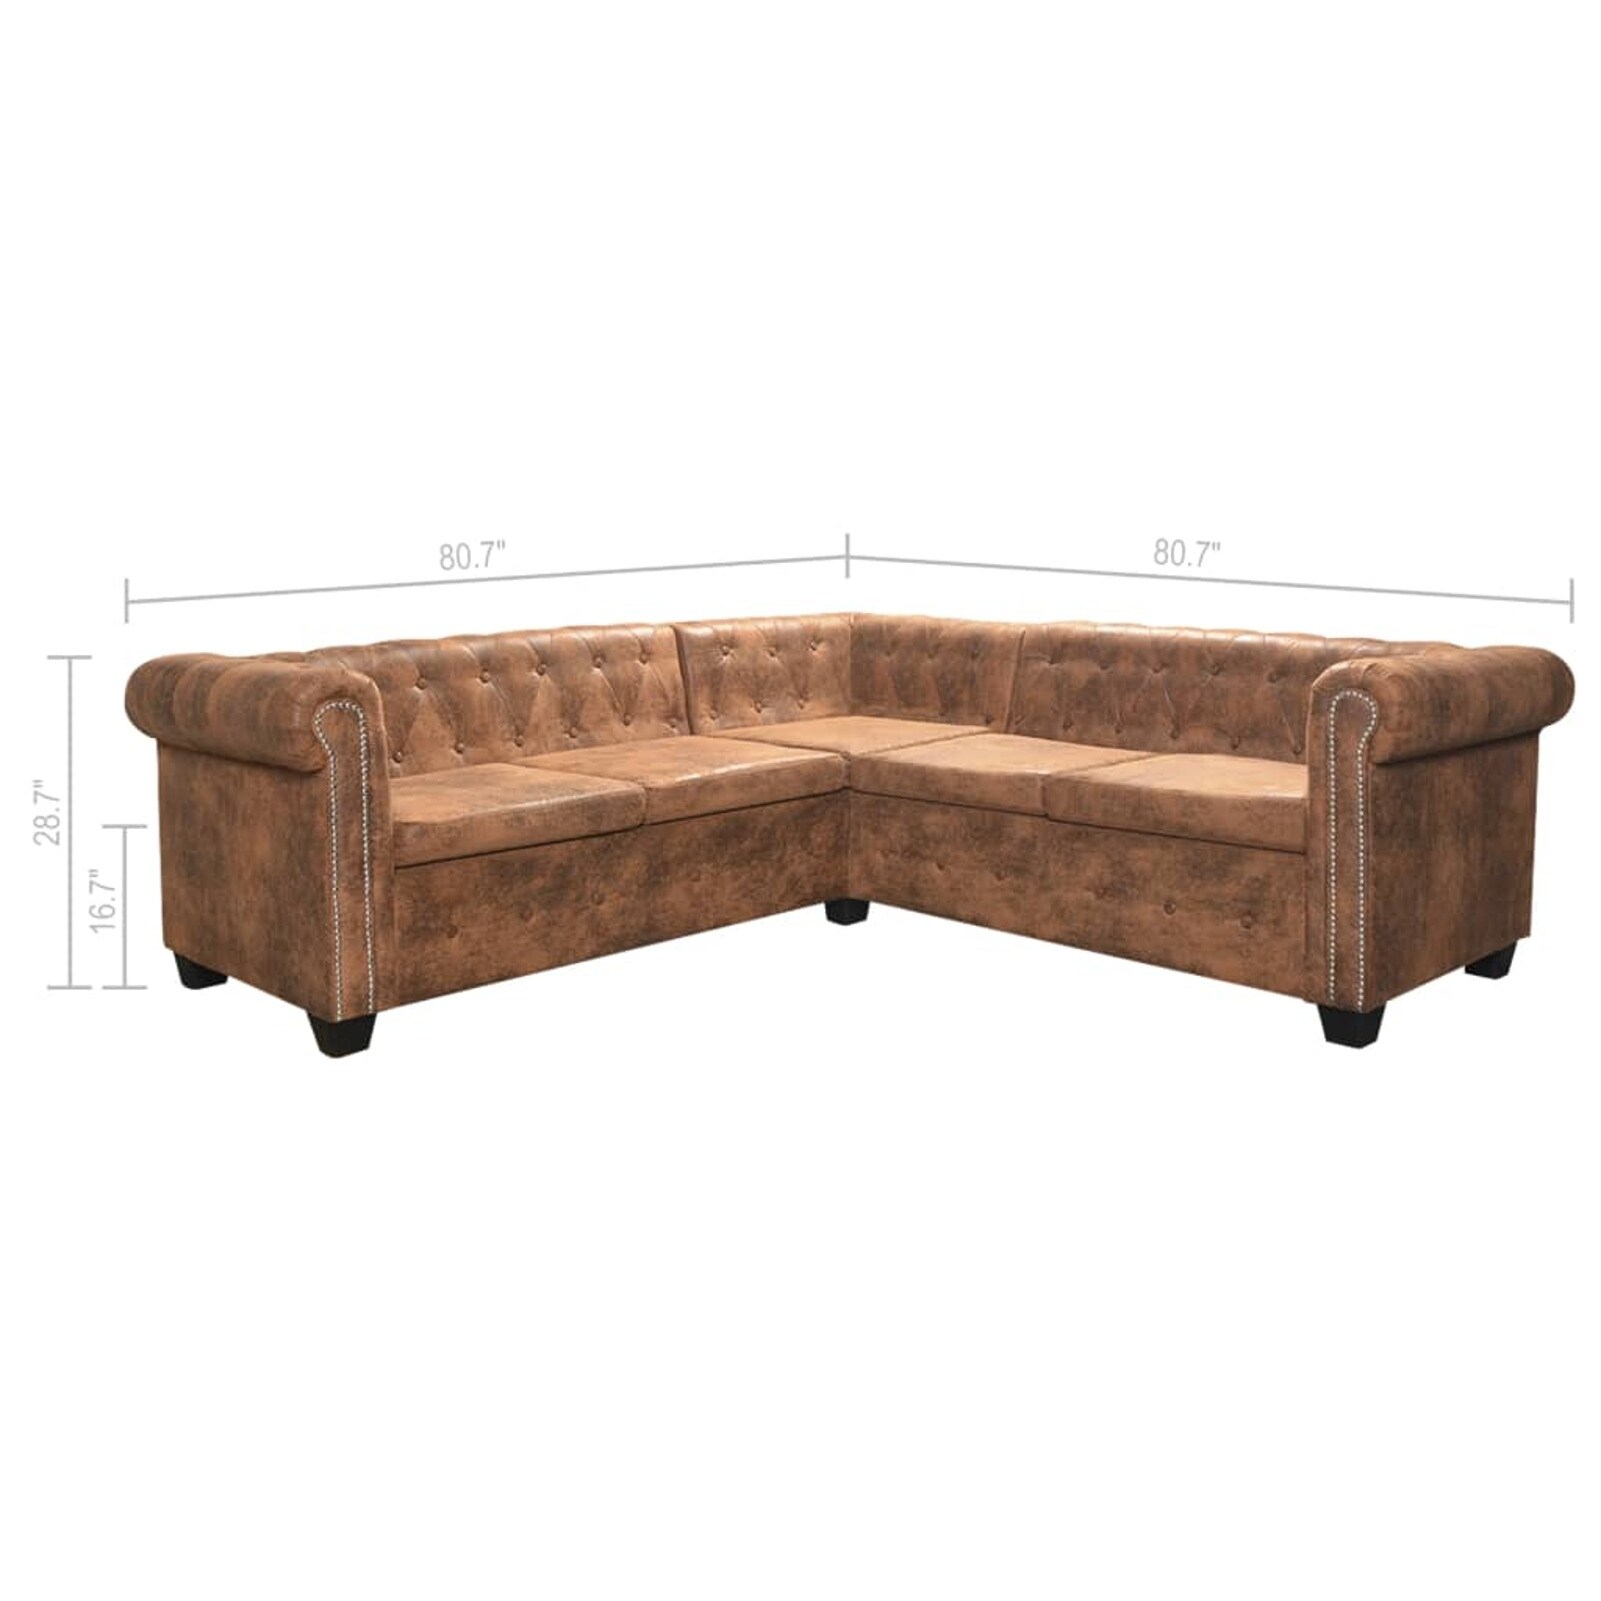 Chesterfield Chesterfield Corner Sofa L-Shaped Couches Upholstery Faux Leather Brown Luxury 